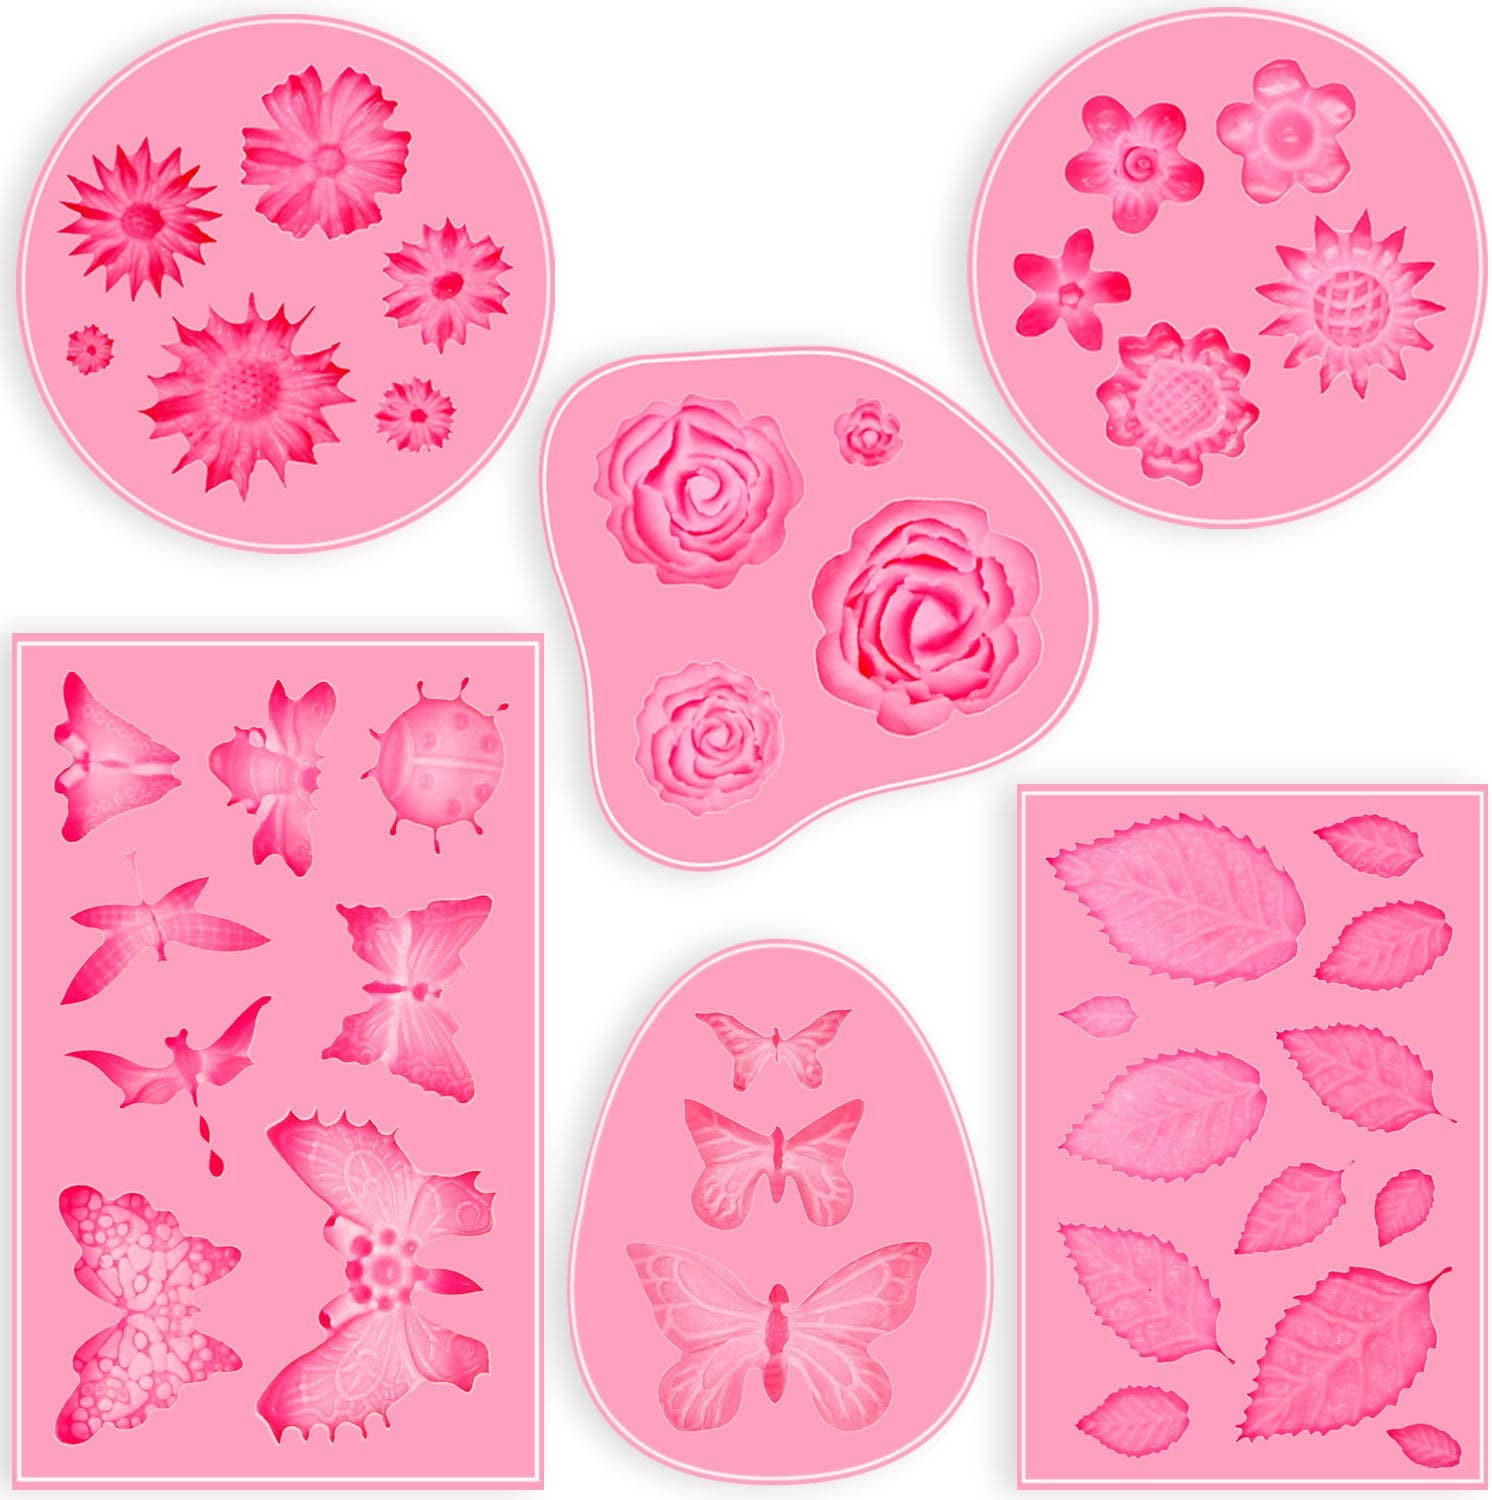 FLORAL FRAME SILICONE MOULD chocolate polymer clay resin mold powder embossing